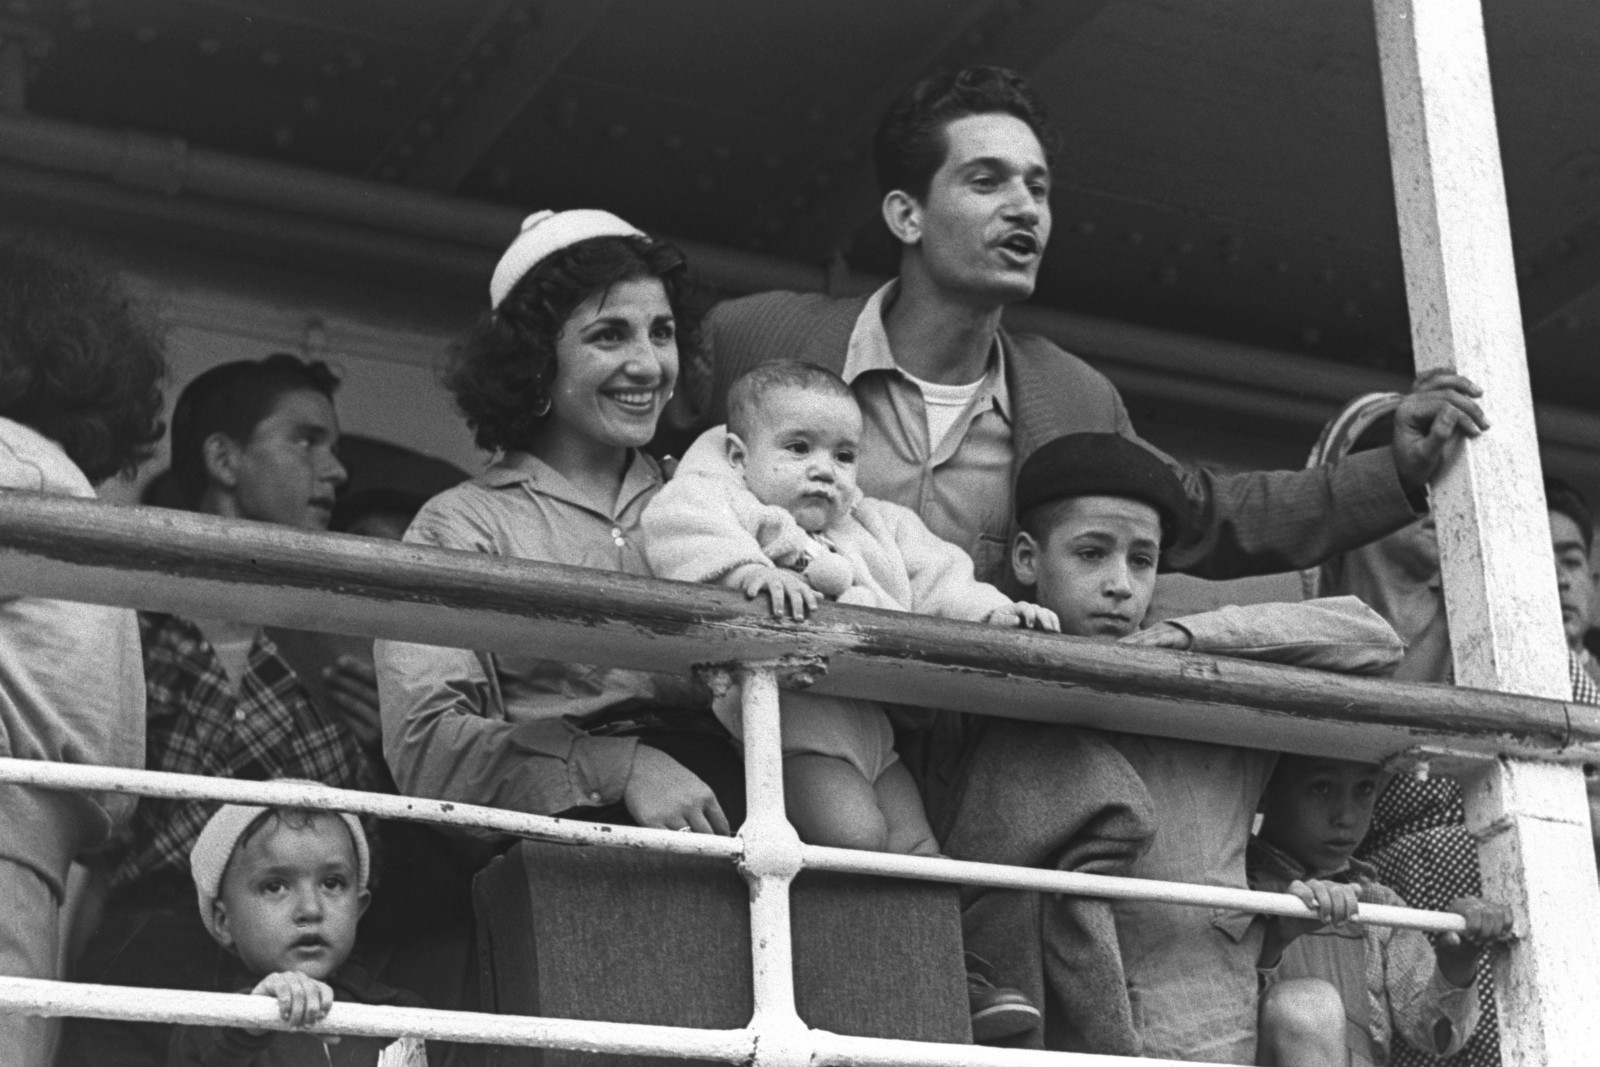 Moroccan Jewish immigrants landing in the port of Haifa in 1954. Photo by Fritz Cohen/Government Press Office